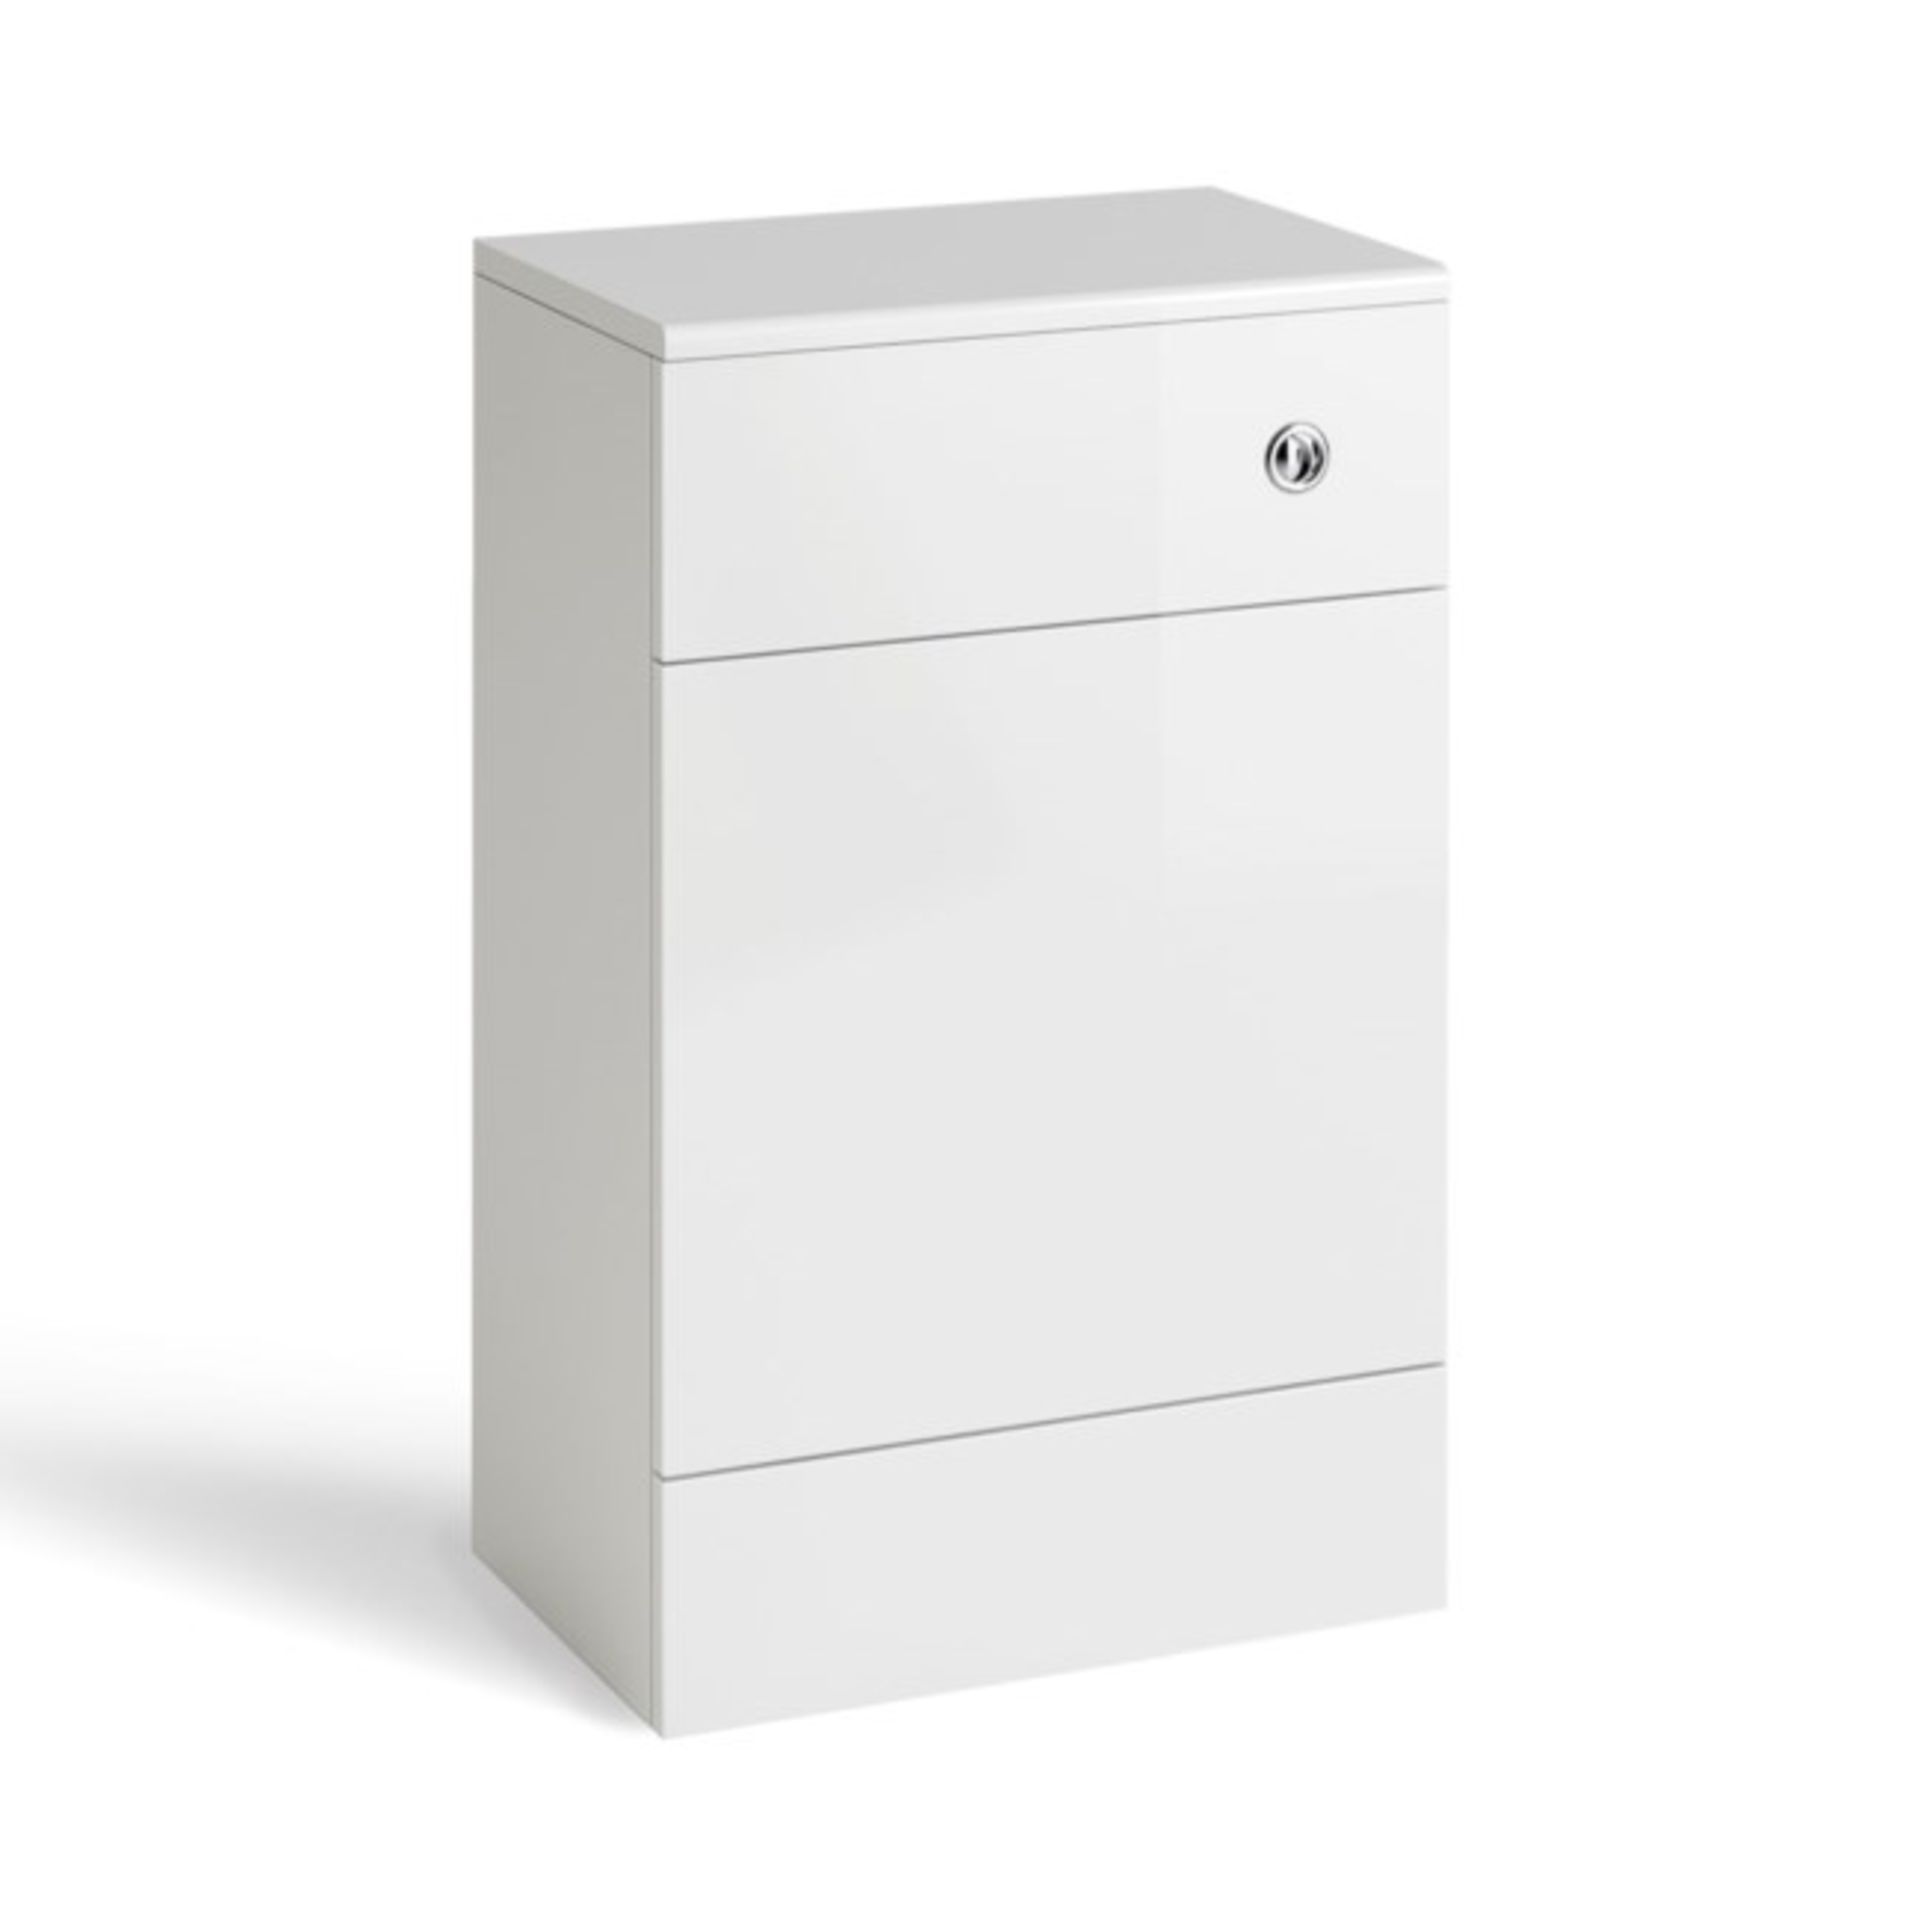 (CE40) 500mm Harper Gloss White Back To Wall Toilet Unit Our discreet unit cleverly houses any ... - Bild 2 aus 3